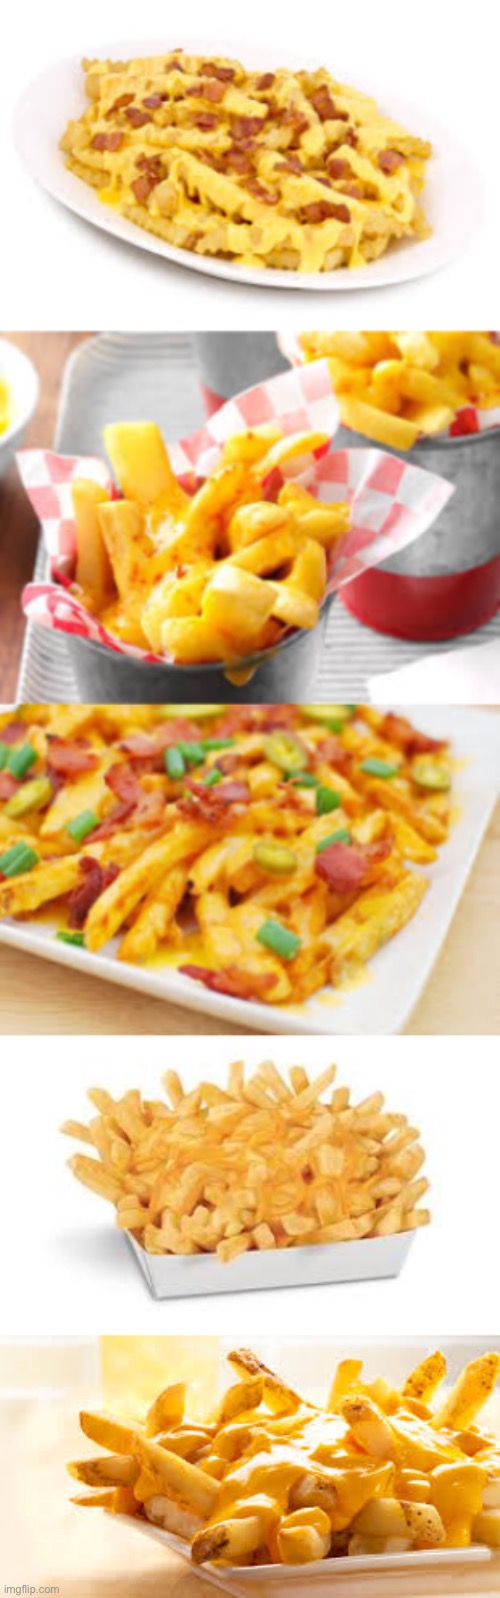 Cheese fries | image tagged in cheese,fries,french fries,food | made w/ Imgflip meme maker